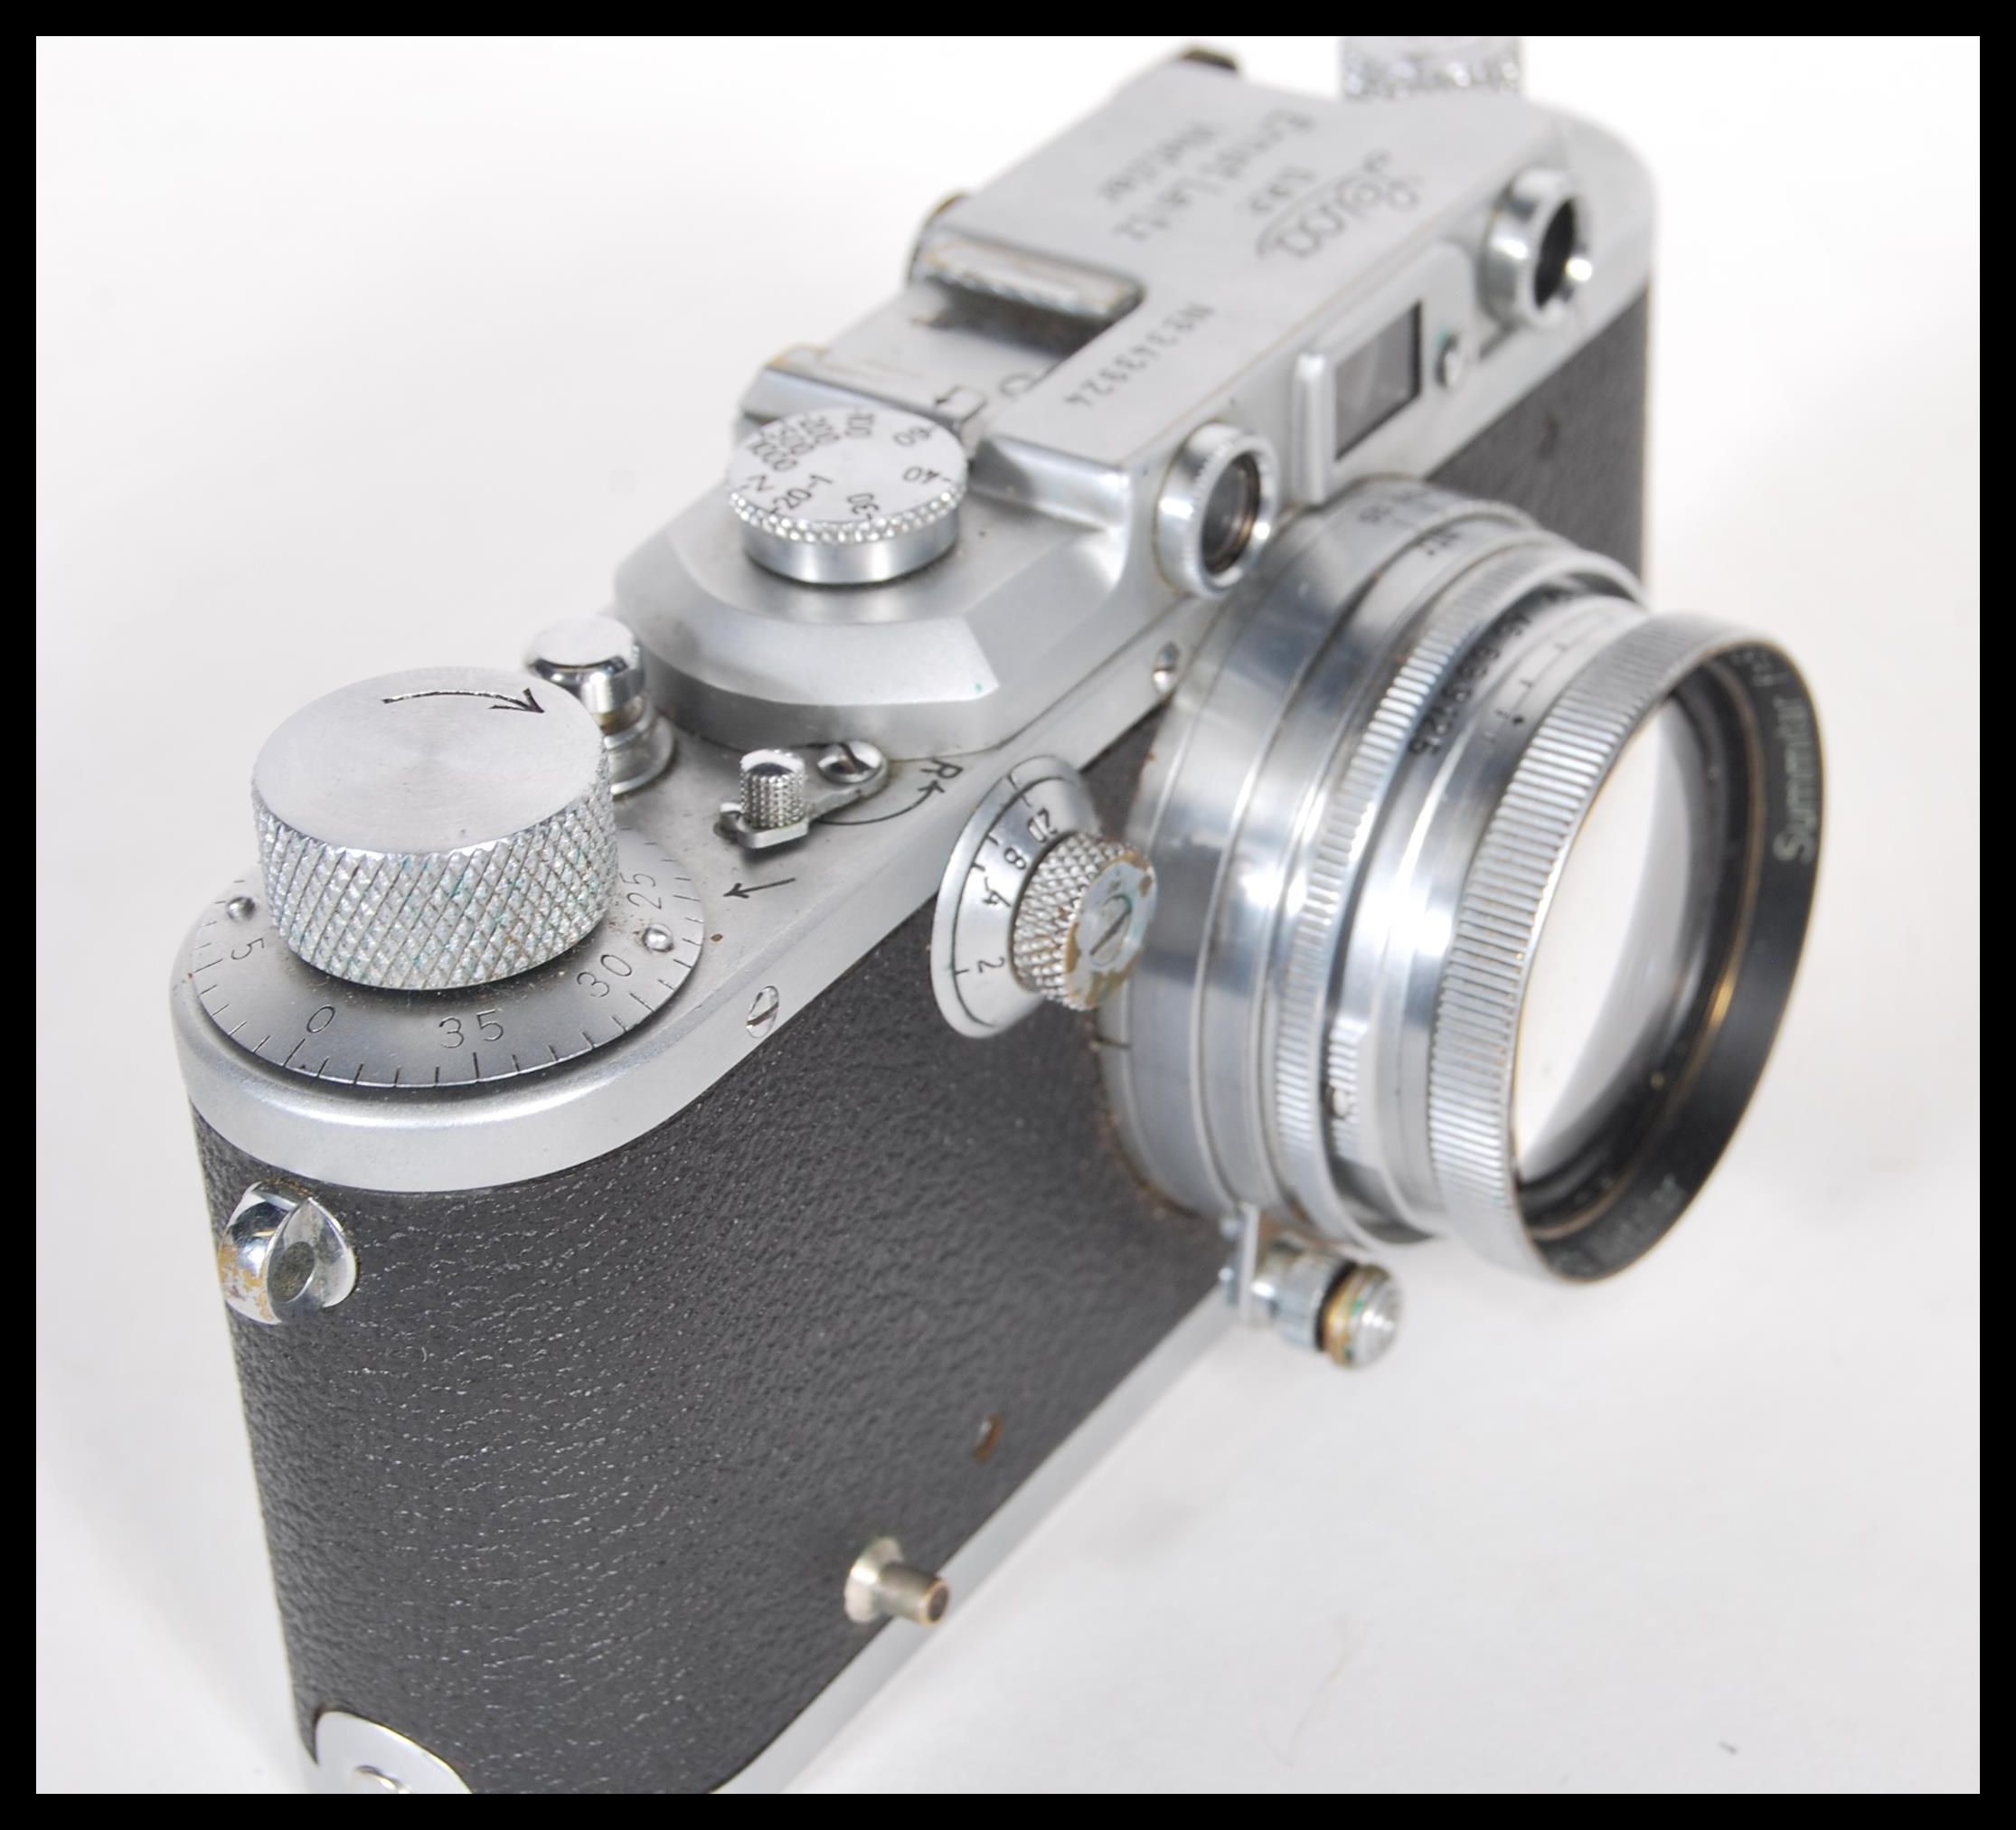 A Leica lll D.P.R Rangefinder chrome camera by Ernst Leitz Wetzlar Germany, Serial number 343924. - Image 7 of 7